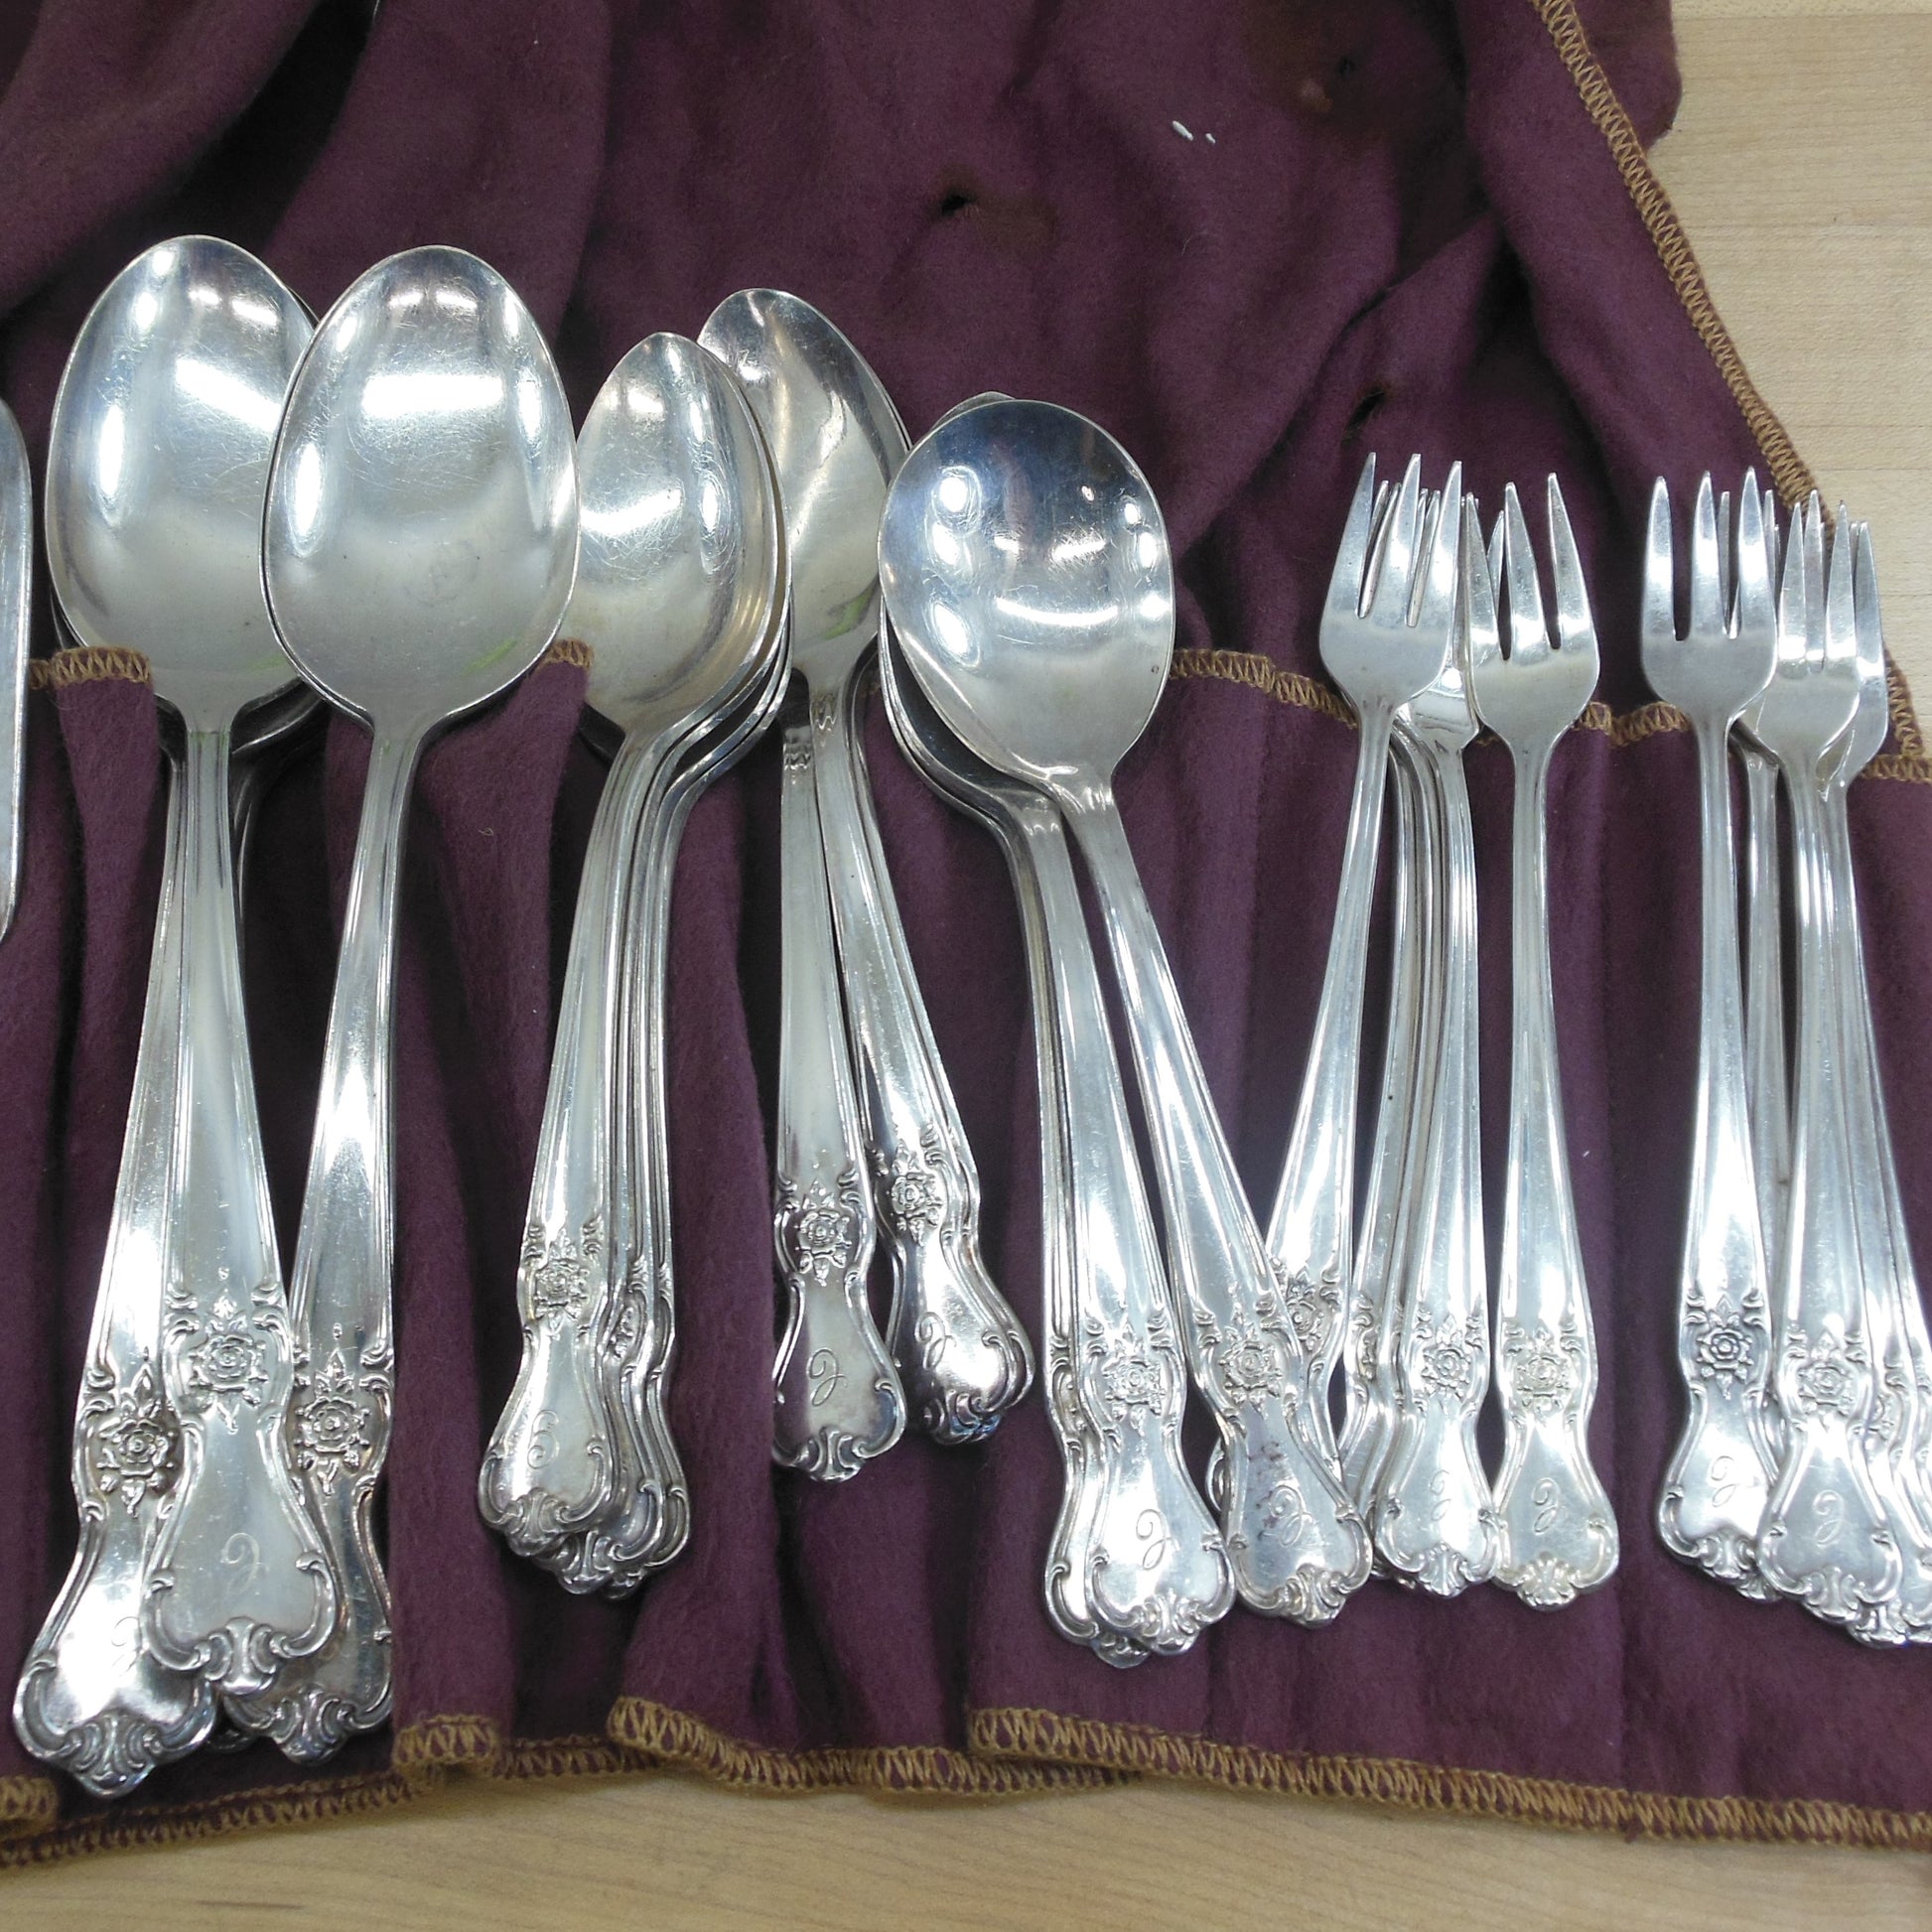 Old Company Plate Signature Rose Flatware Set Service for 6 - 47 Pieces vintage